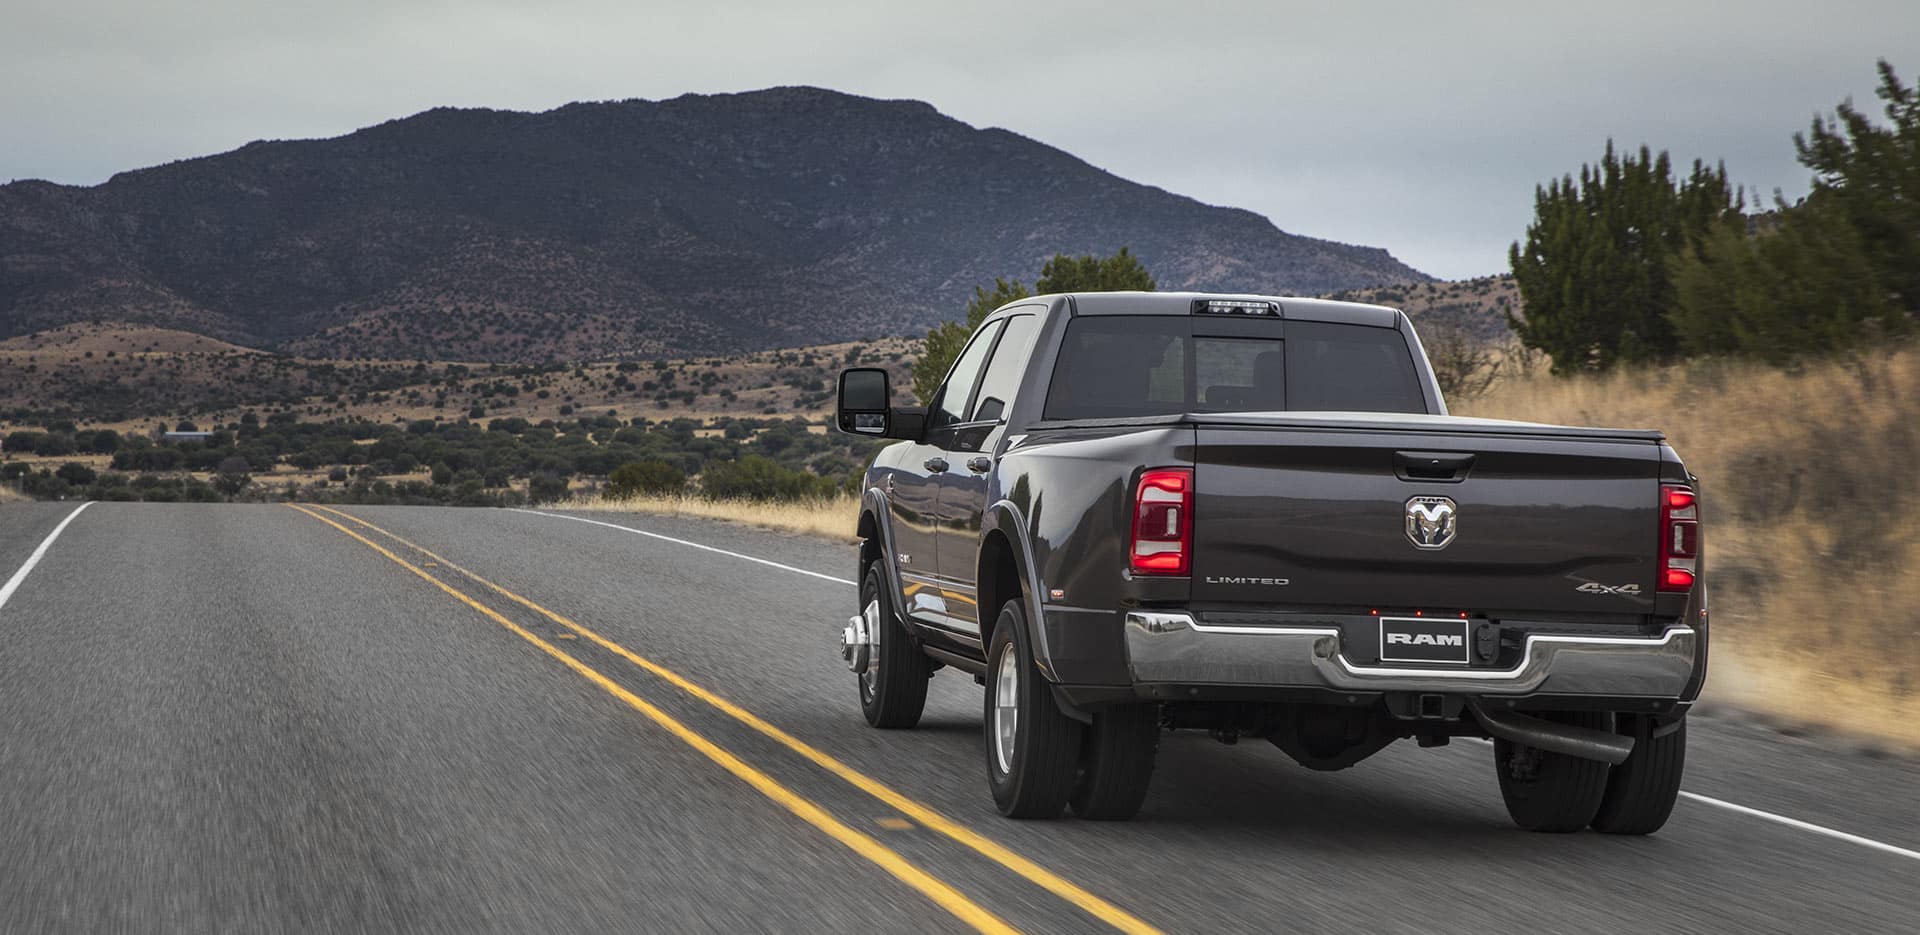 Display A rear view of the 2023 Ram 3500 Limited Crew Cab being driven on a highway toward a group of mountains.